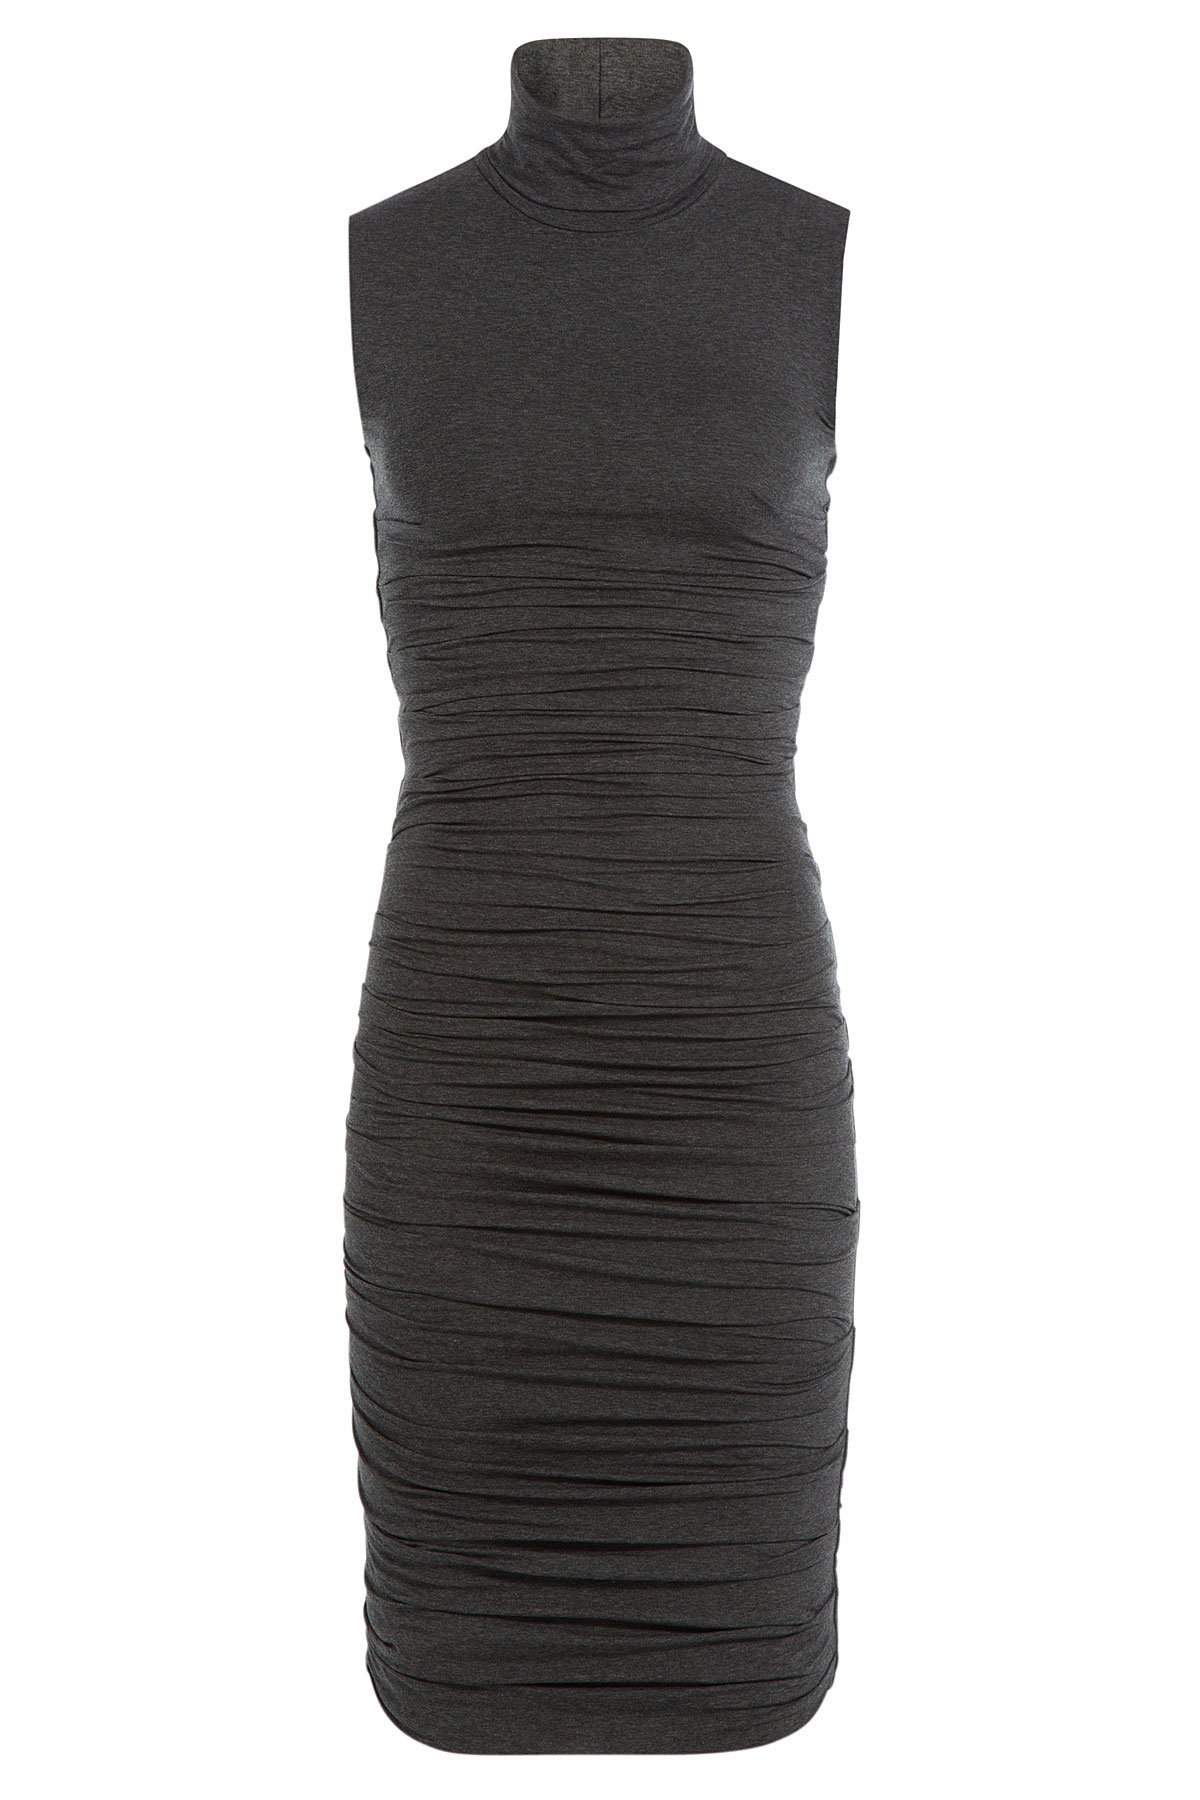 Bailey 44 - Jersey Dress with Turtleneck